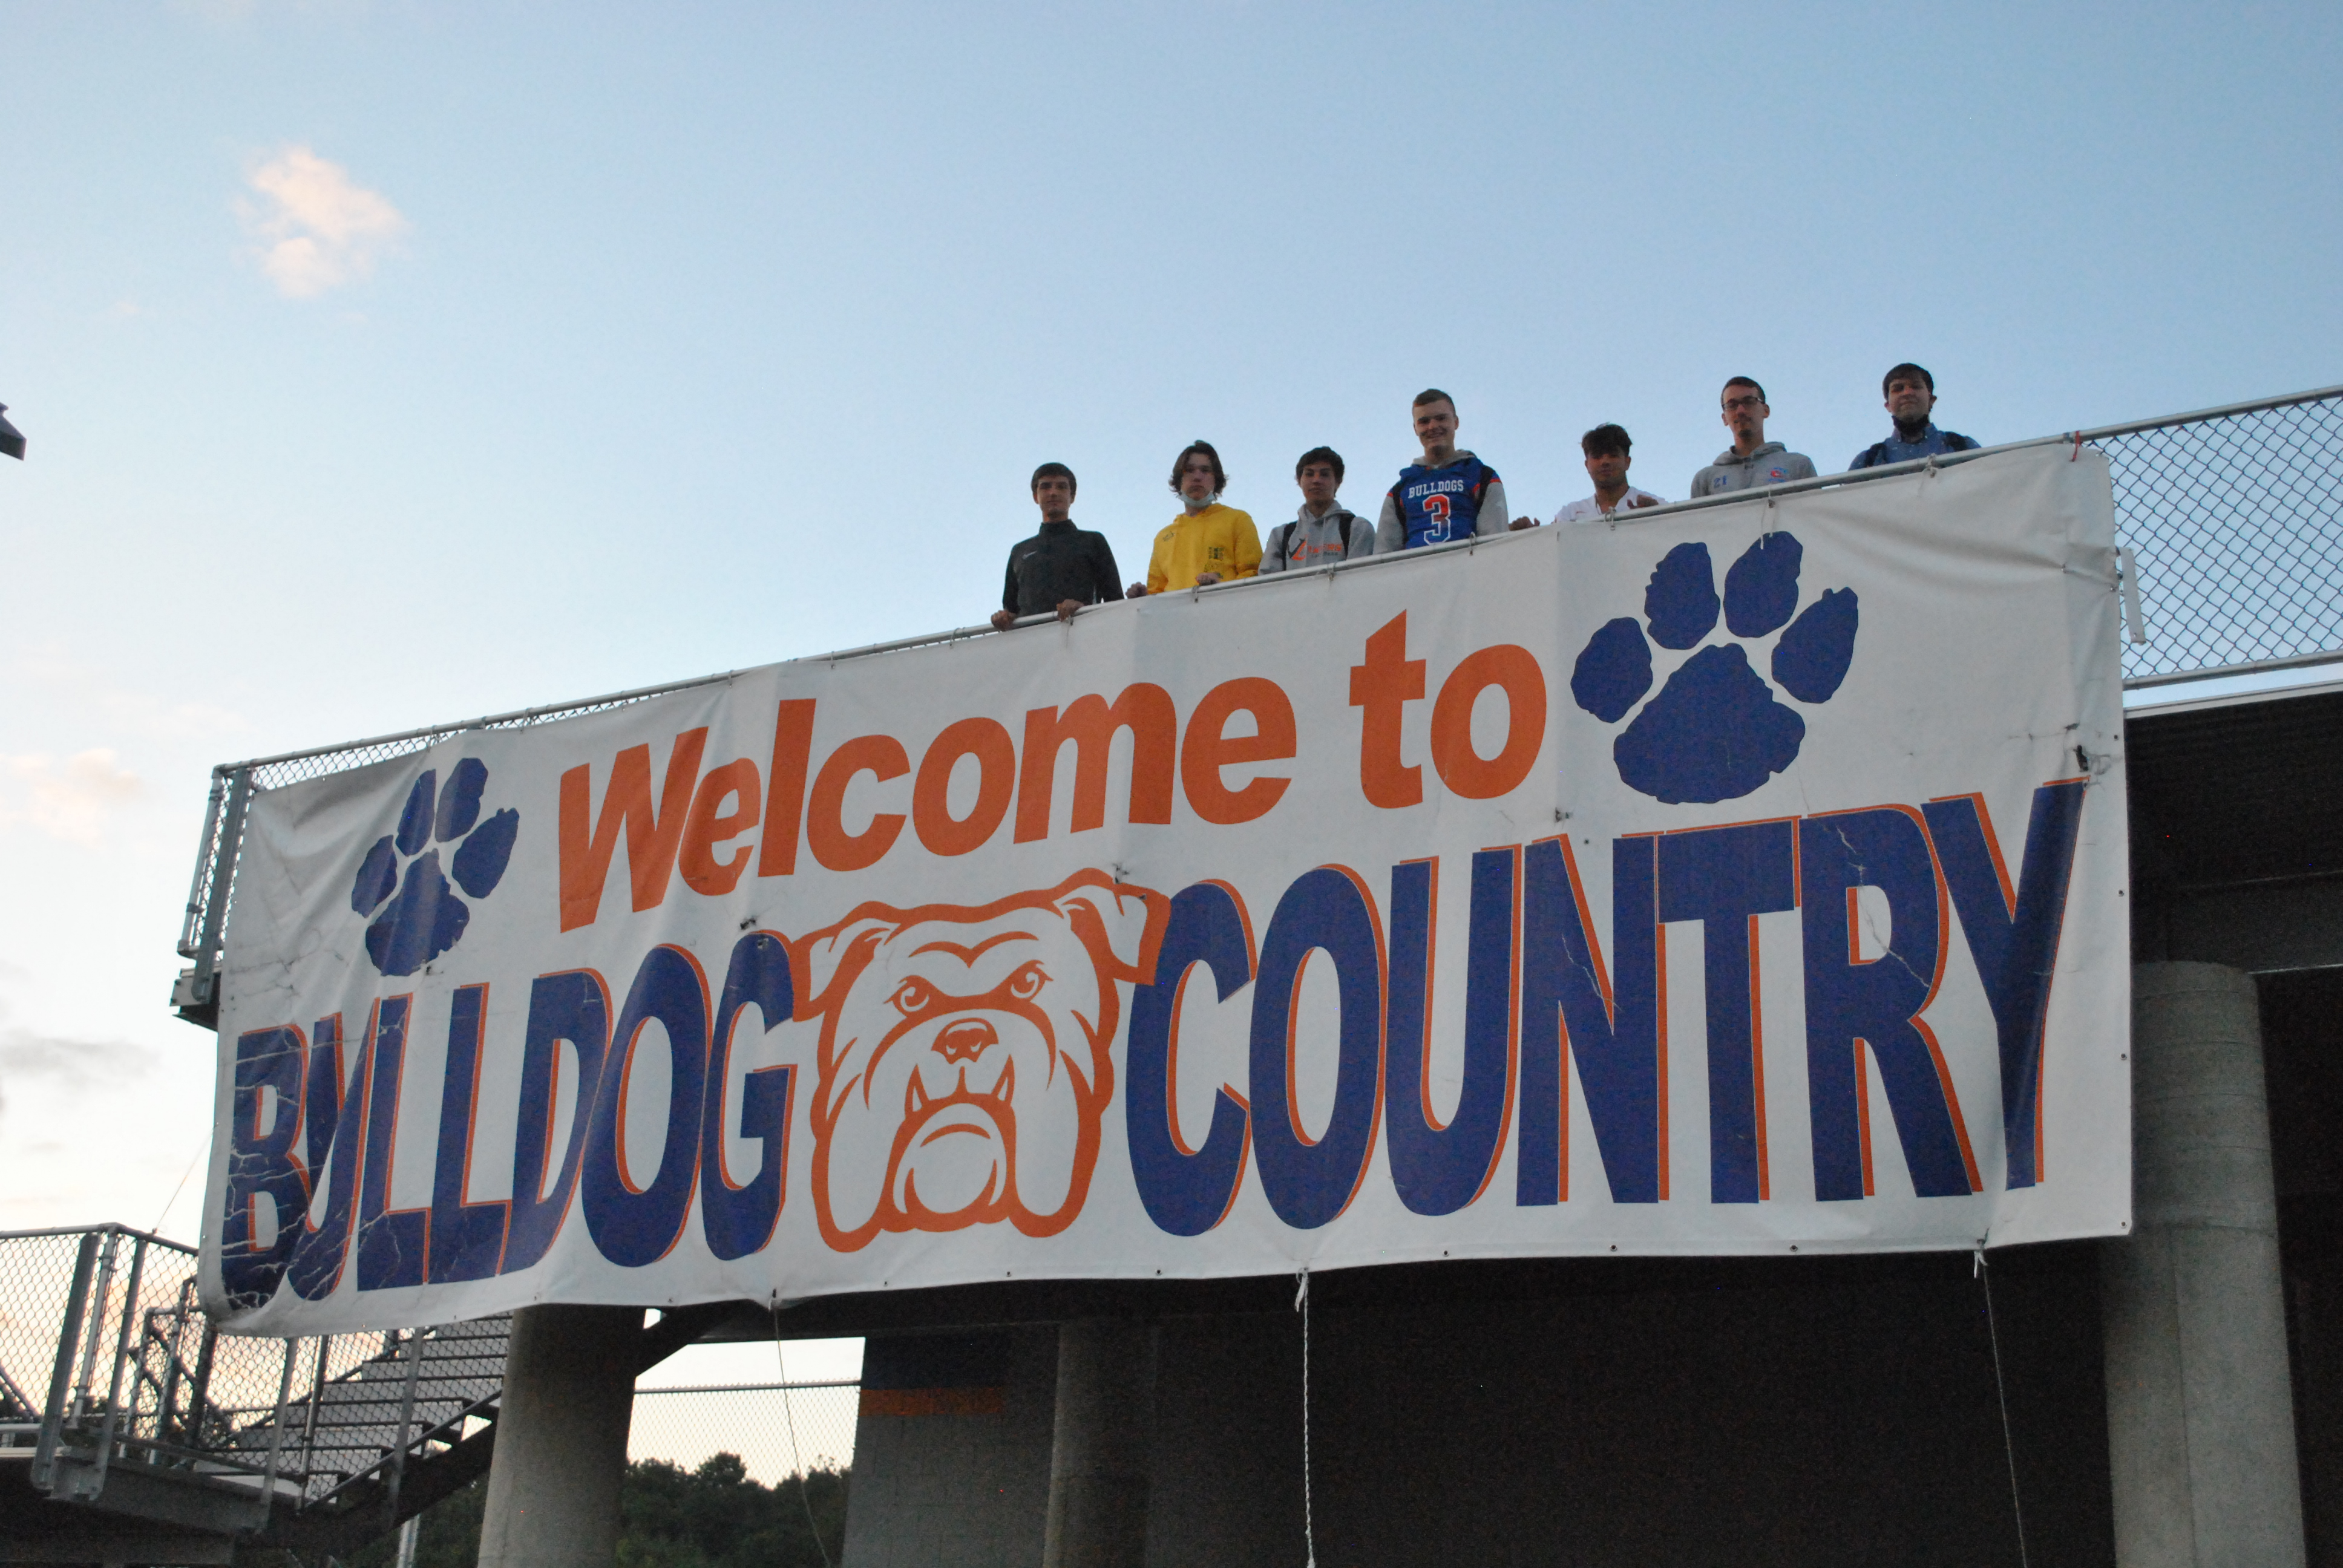 welcome to bulldog country